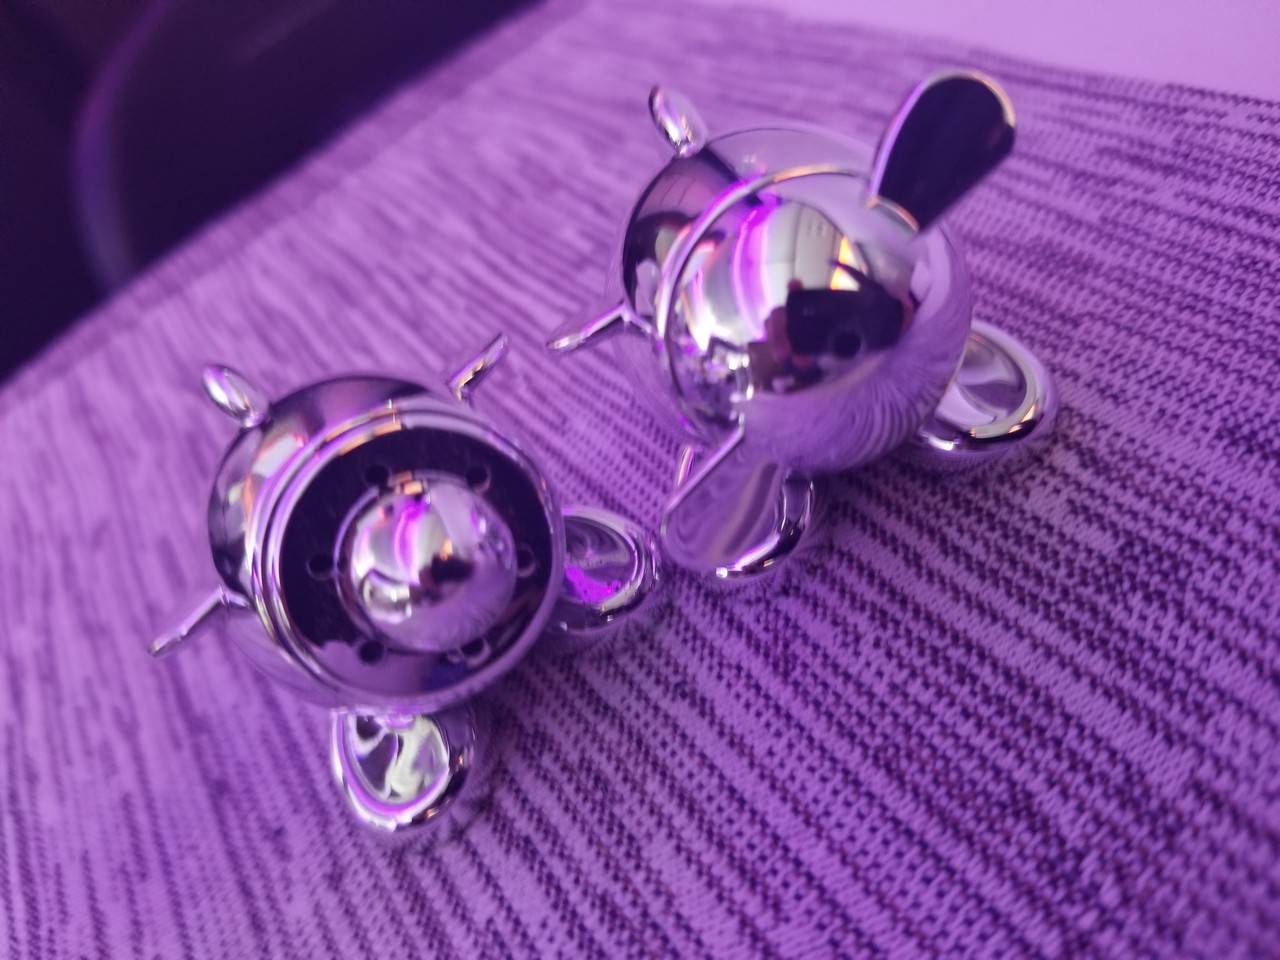 a pair of silver objects on a purple surface